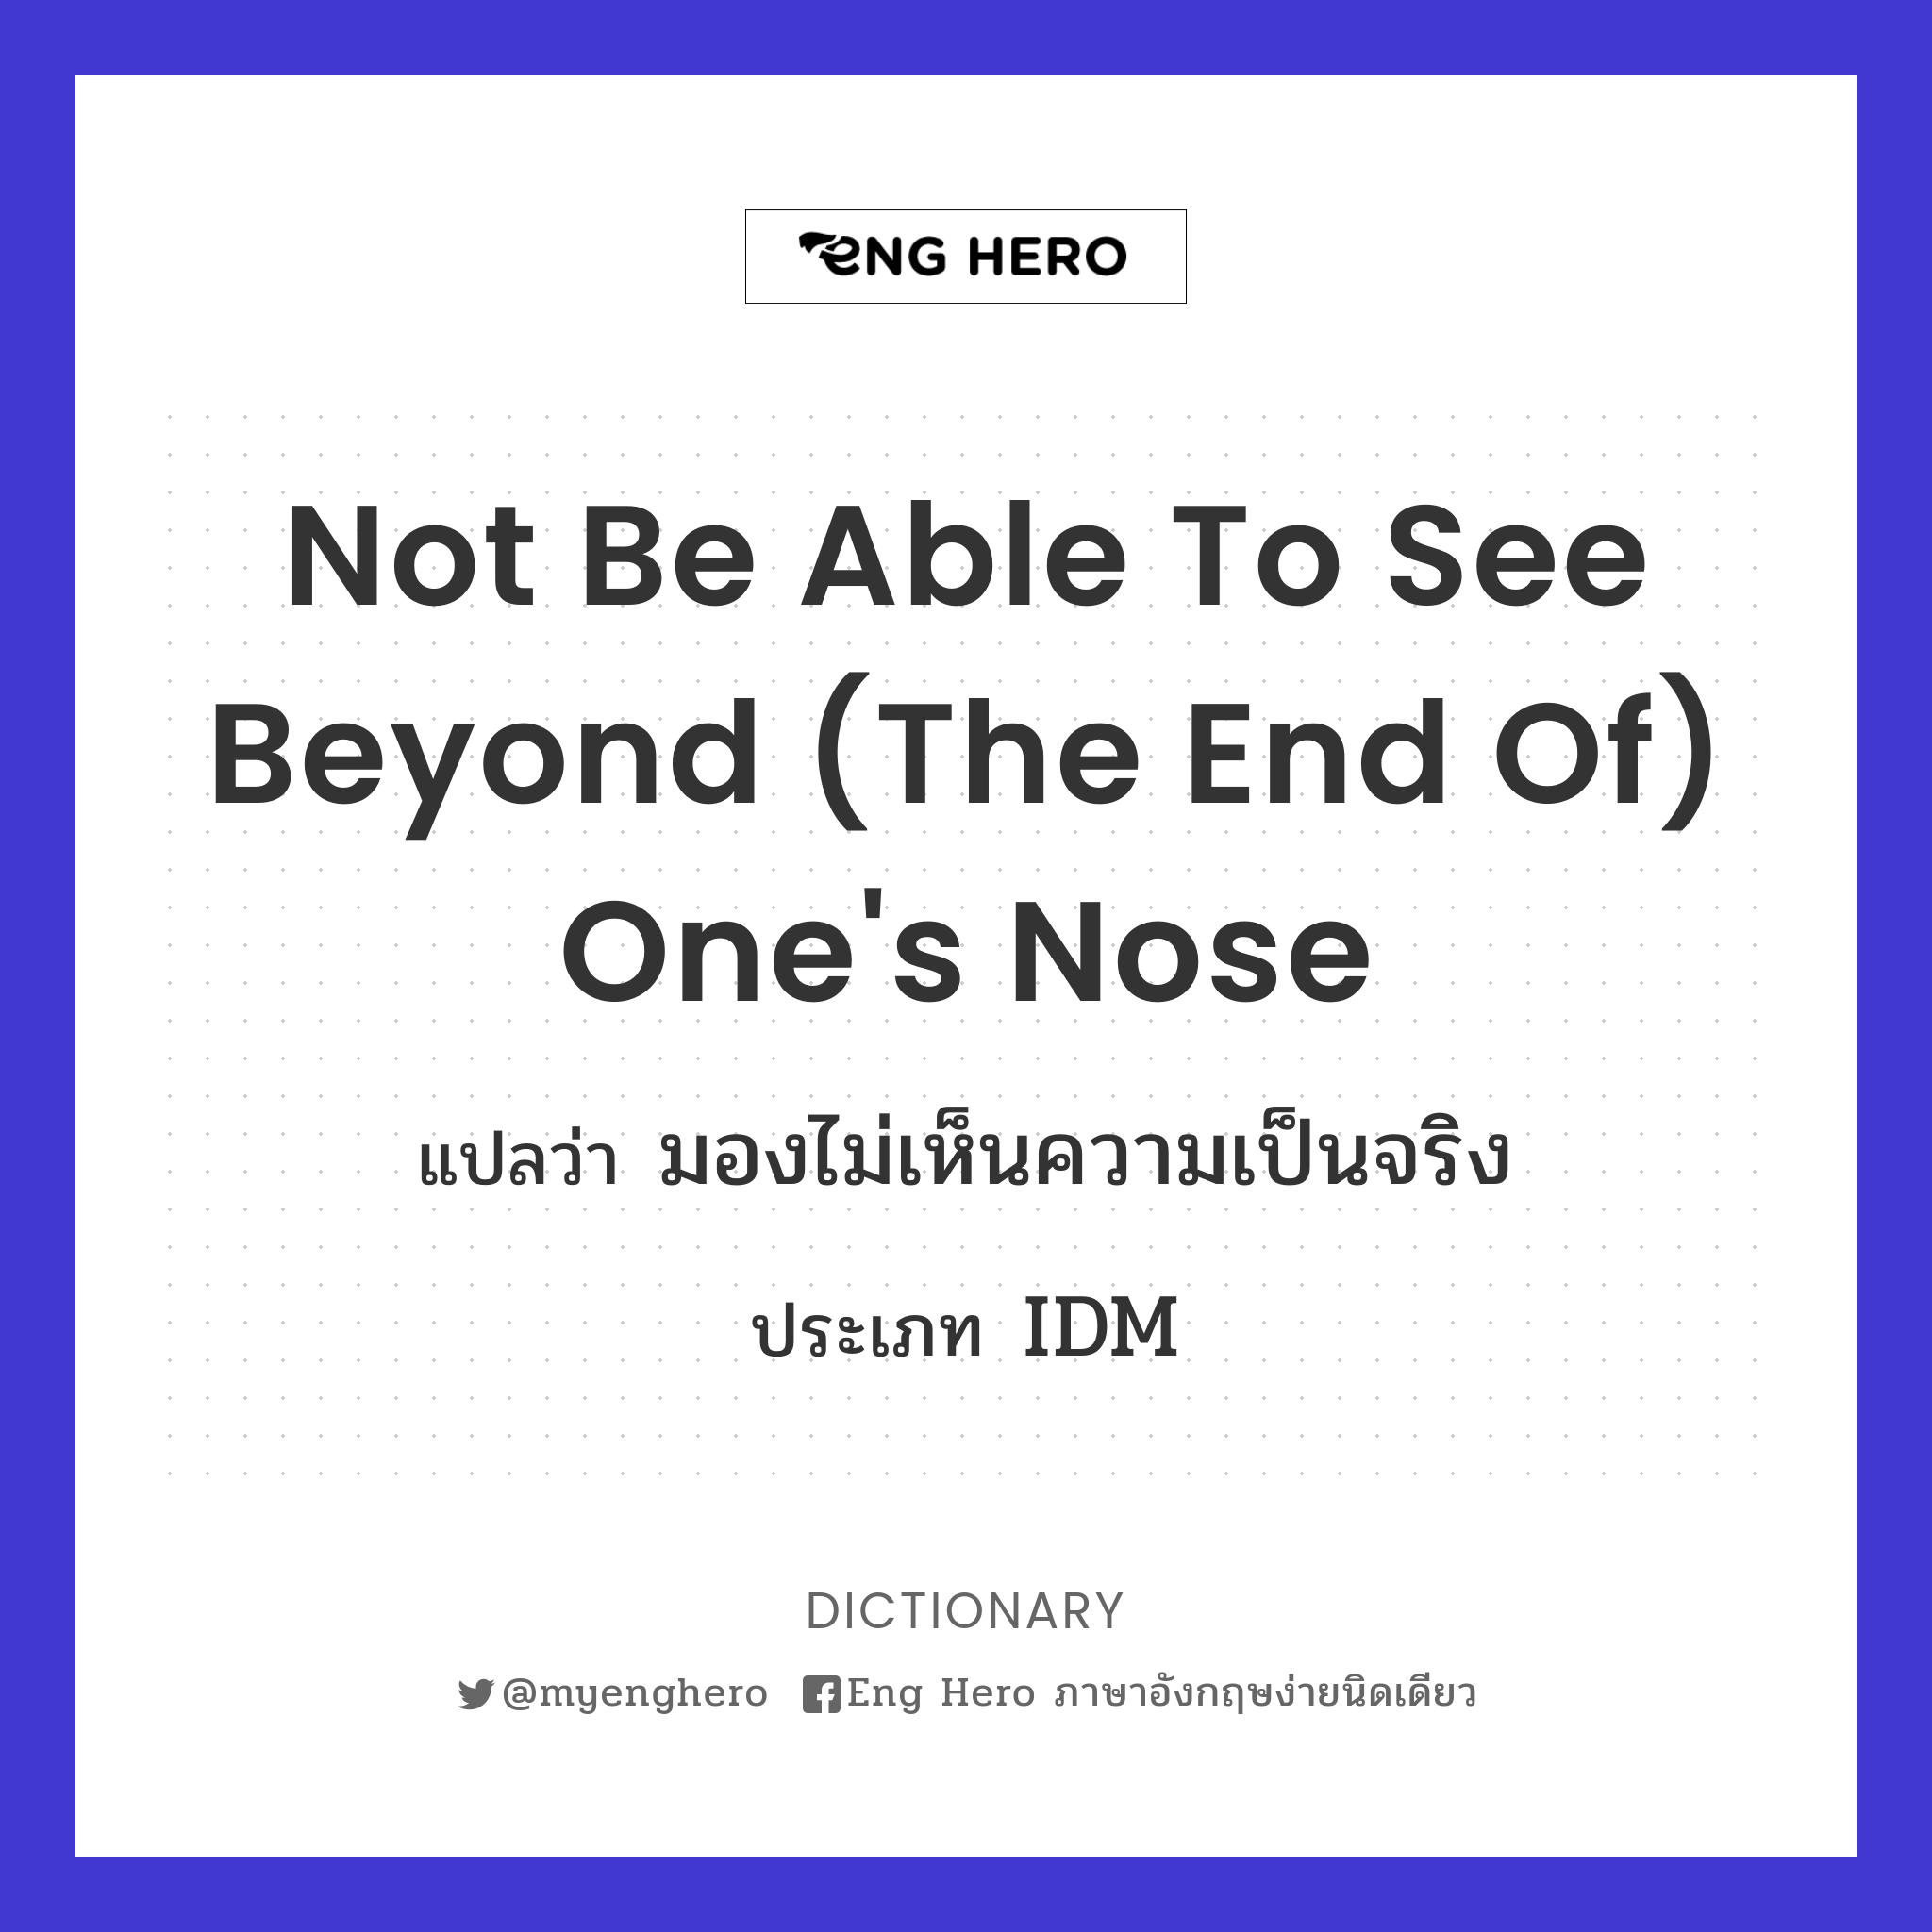 not be able to see beyond (the end of) one's nose